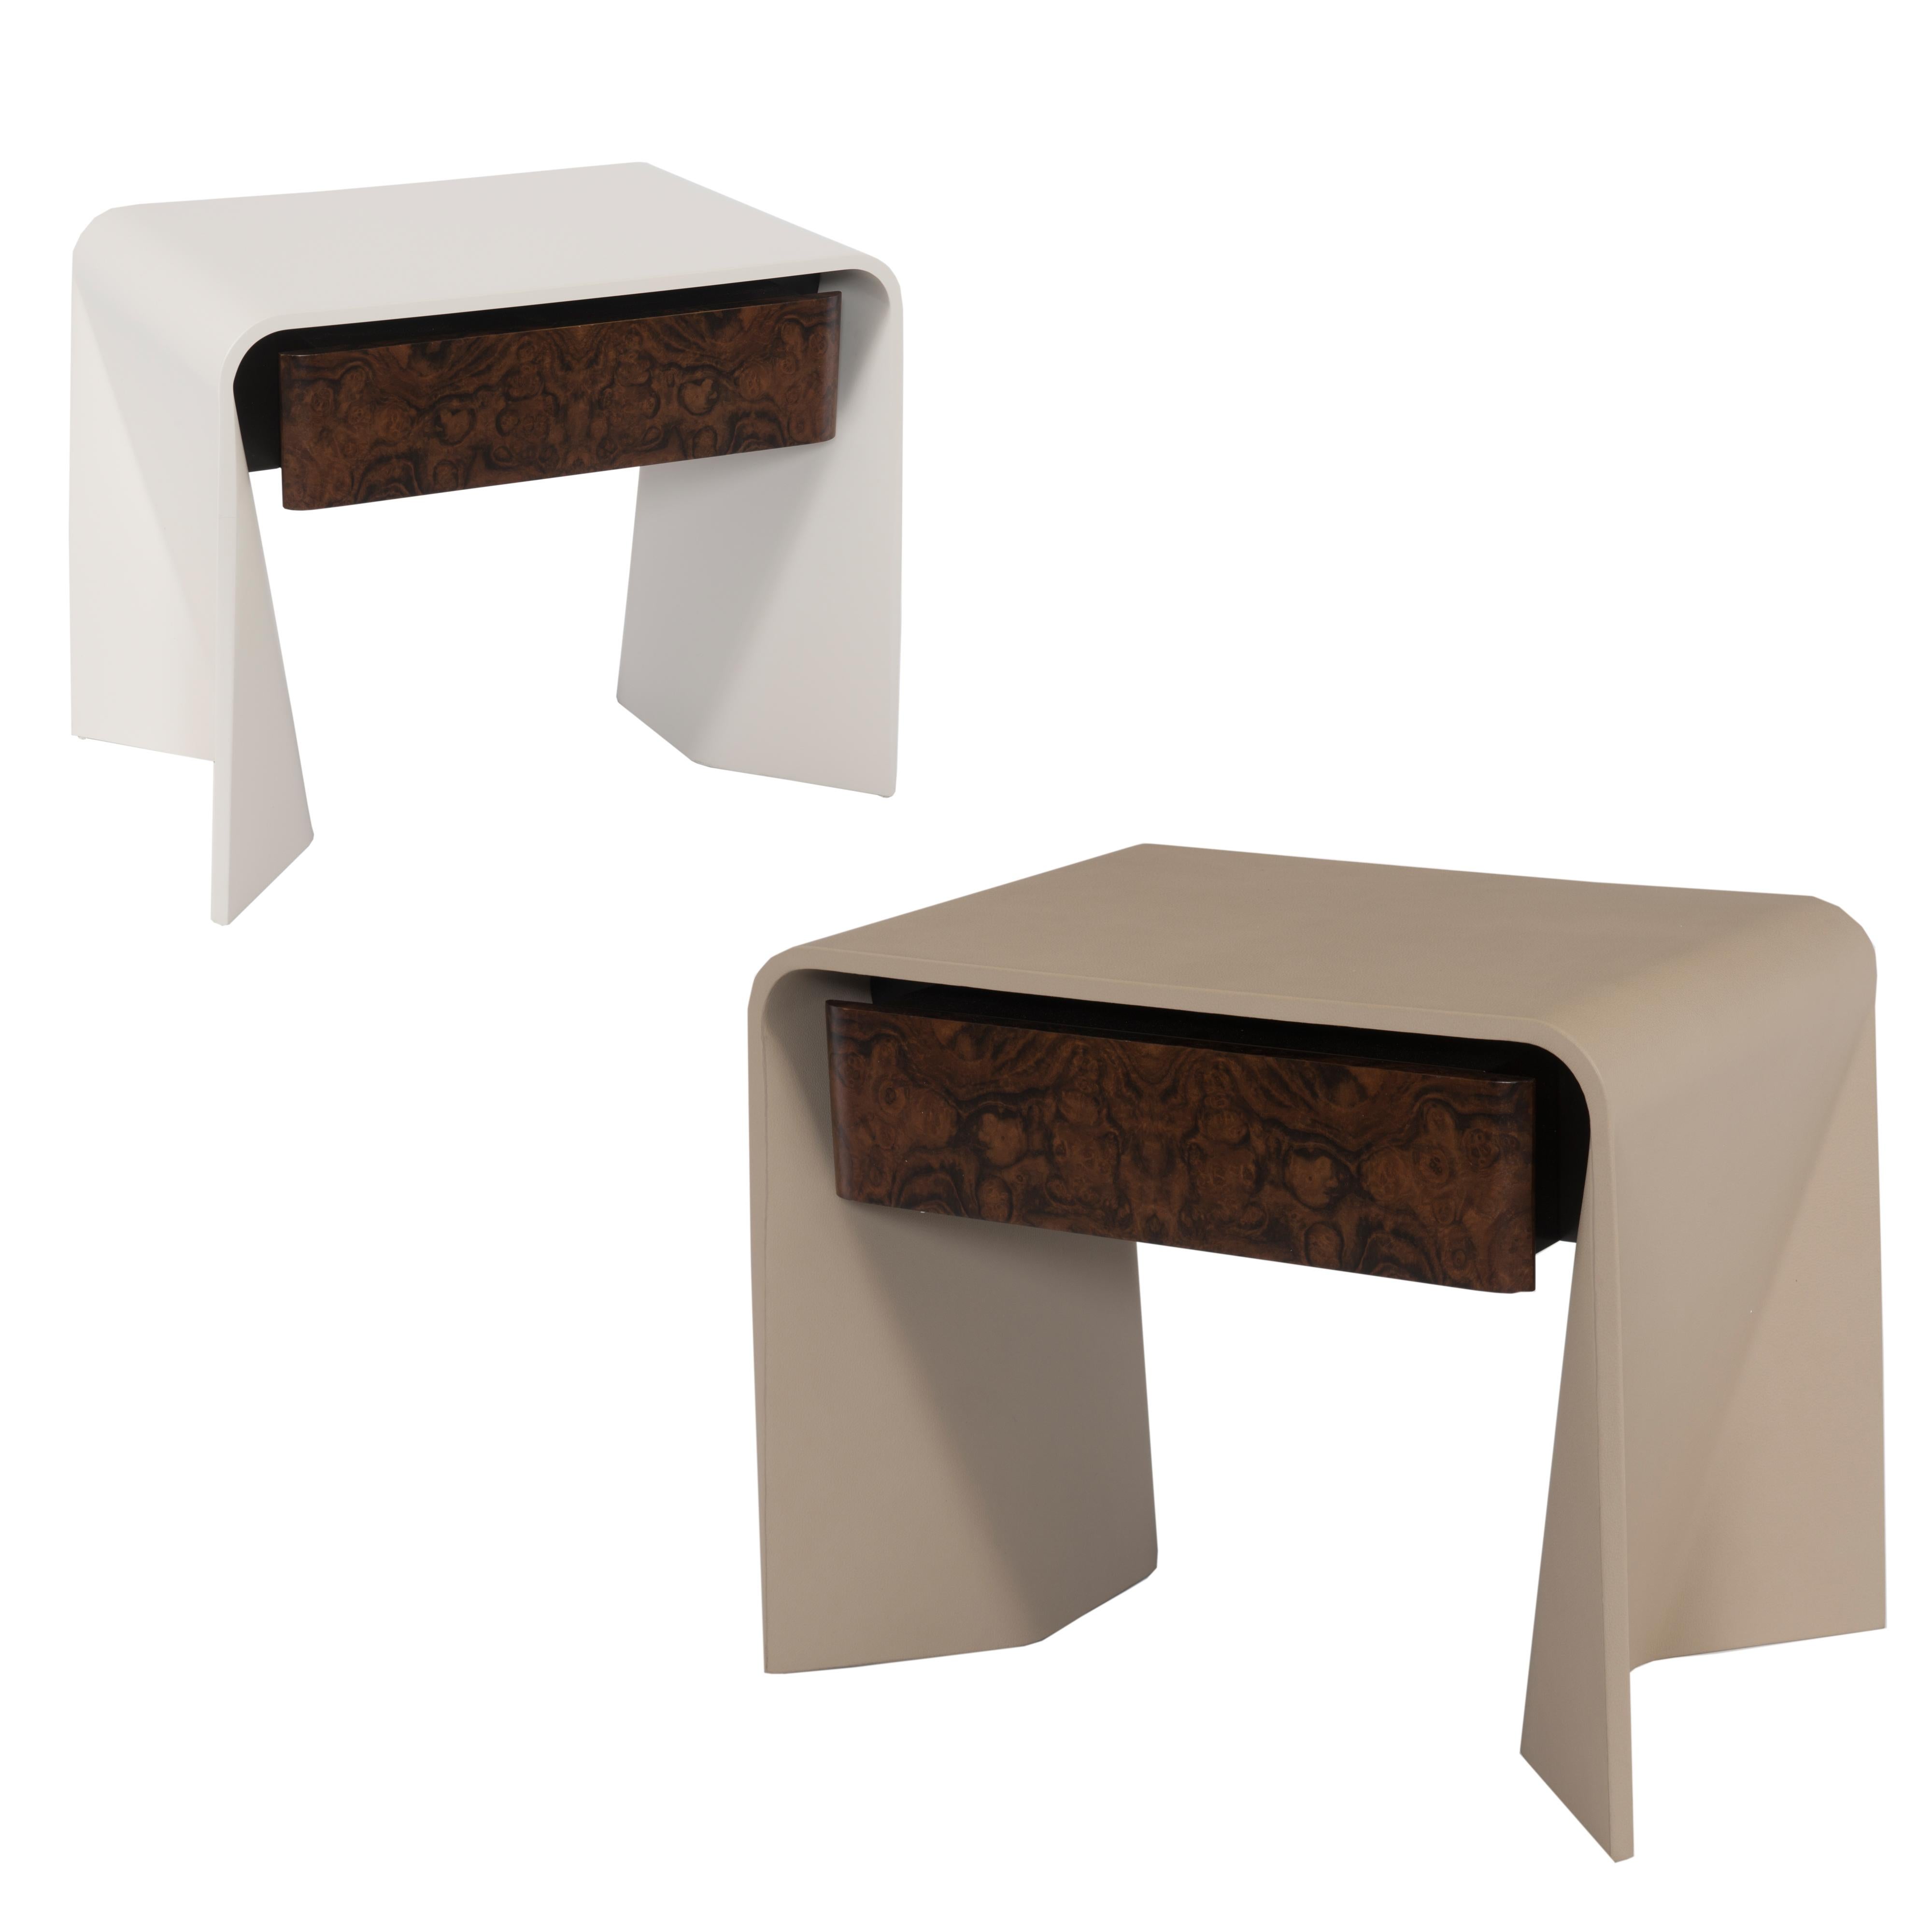 Donghia Tendu Lacquered Wood End Table in Parchment im Zustand „Neu“ im Angebot in New York, NY